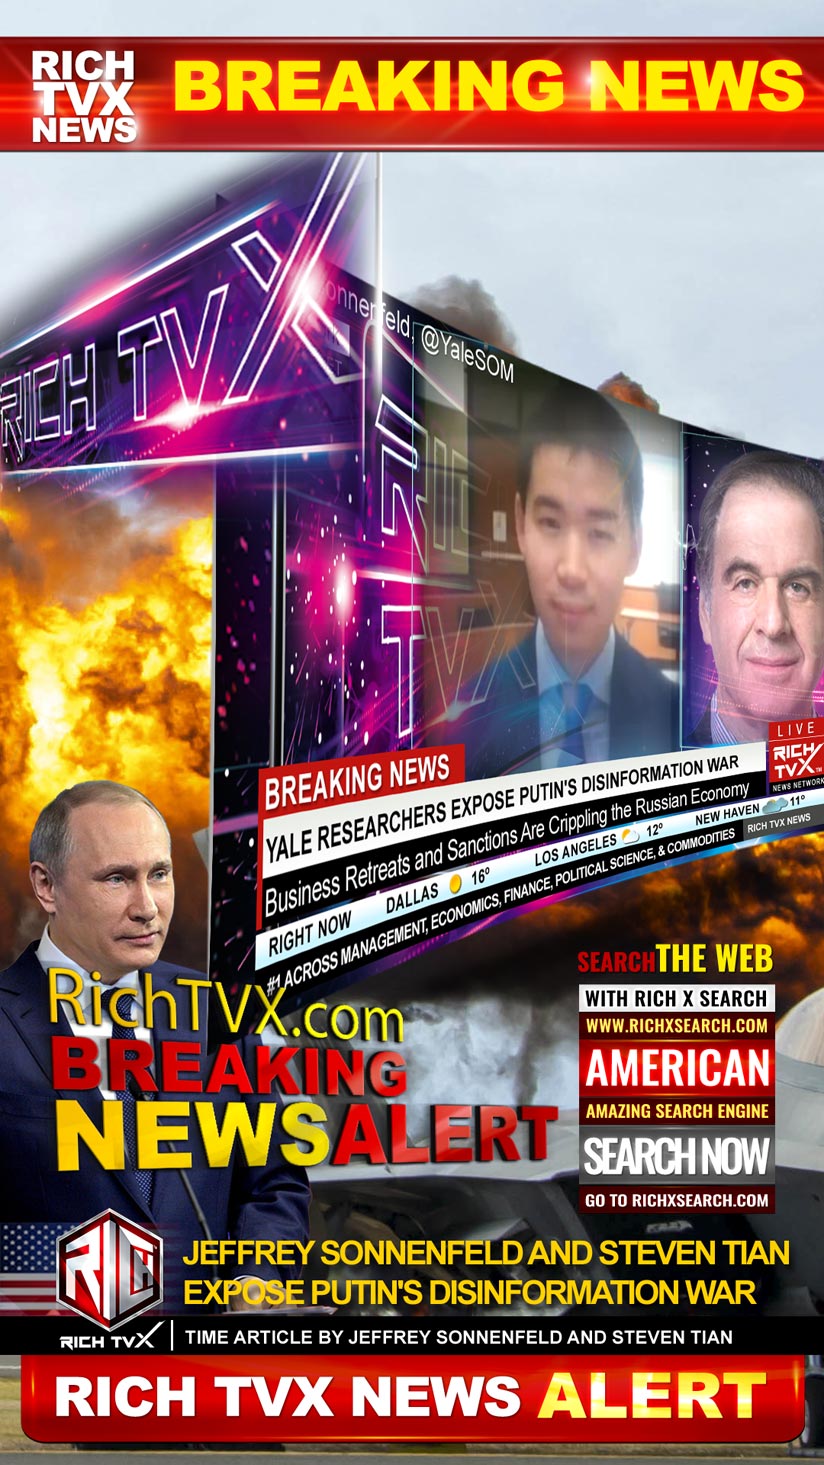 Jeffrey Sonnenfeld and Steven Tian Expose Putin’s Disinformation War in Time Article